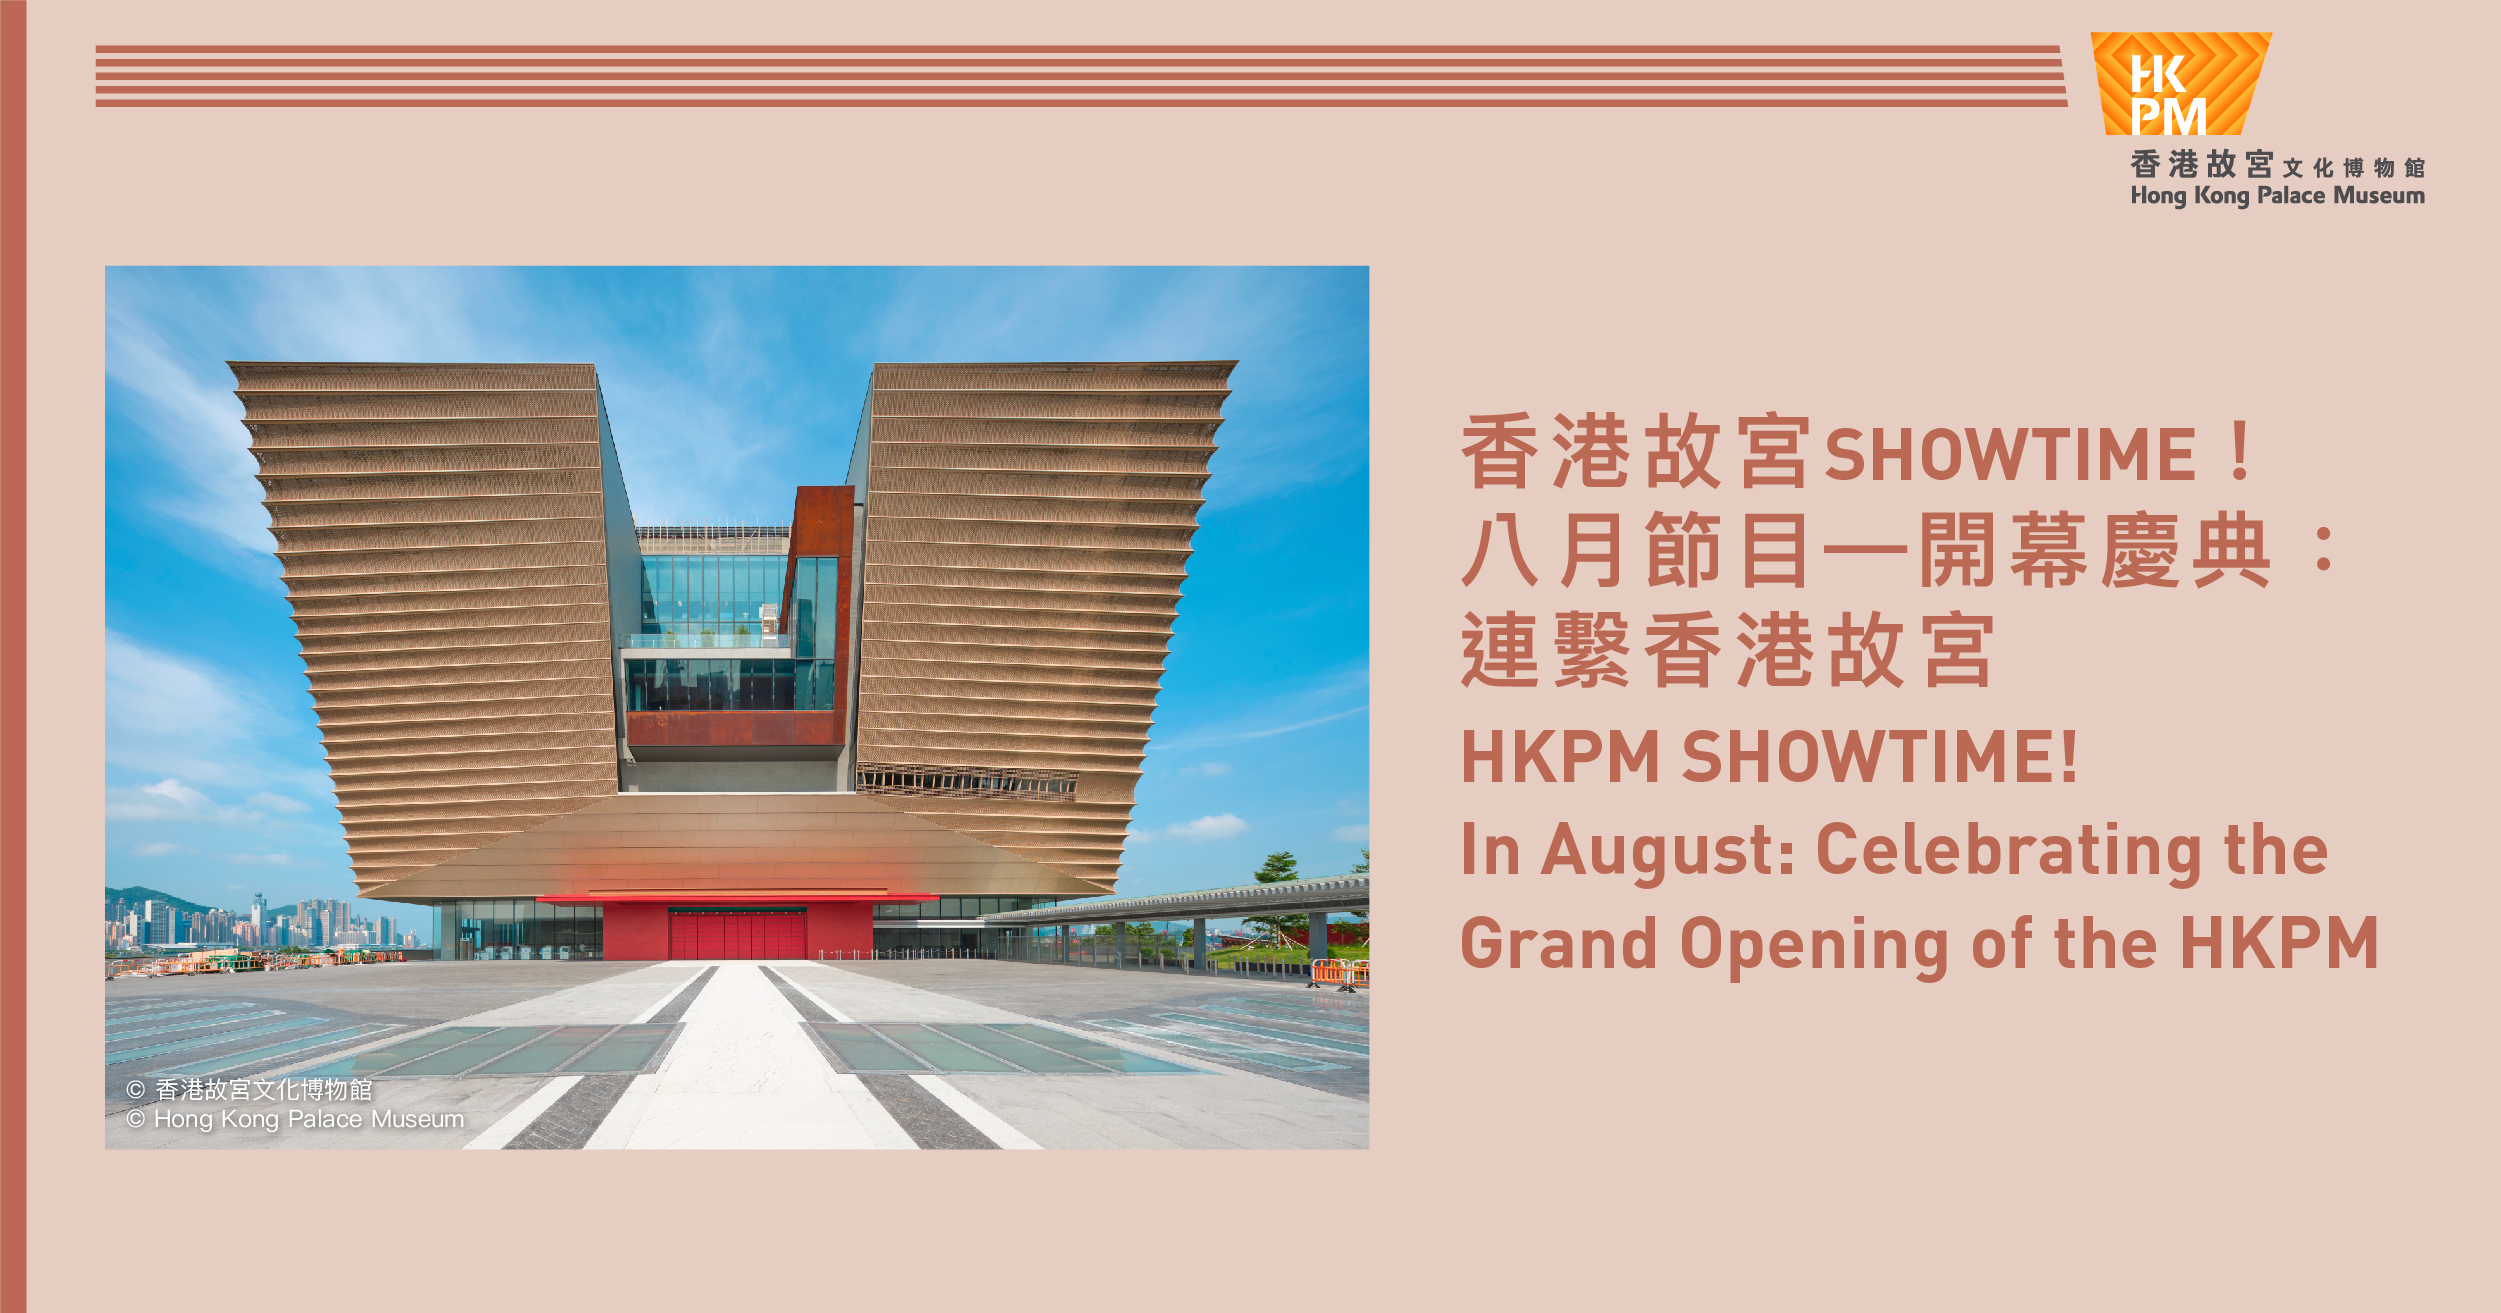 Hong Kong Palace Museum HKPM SHOWTIME! In August Celebrating the